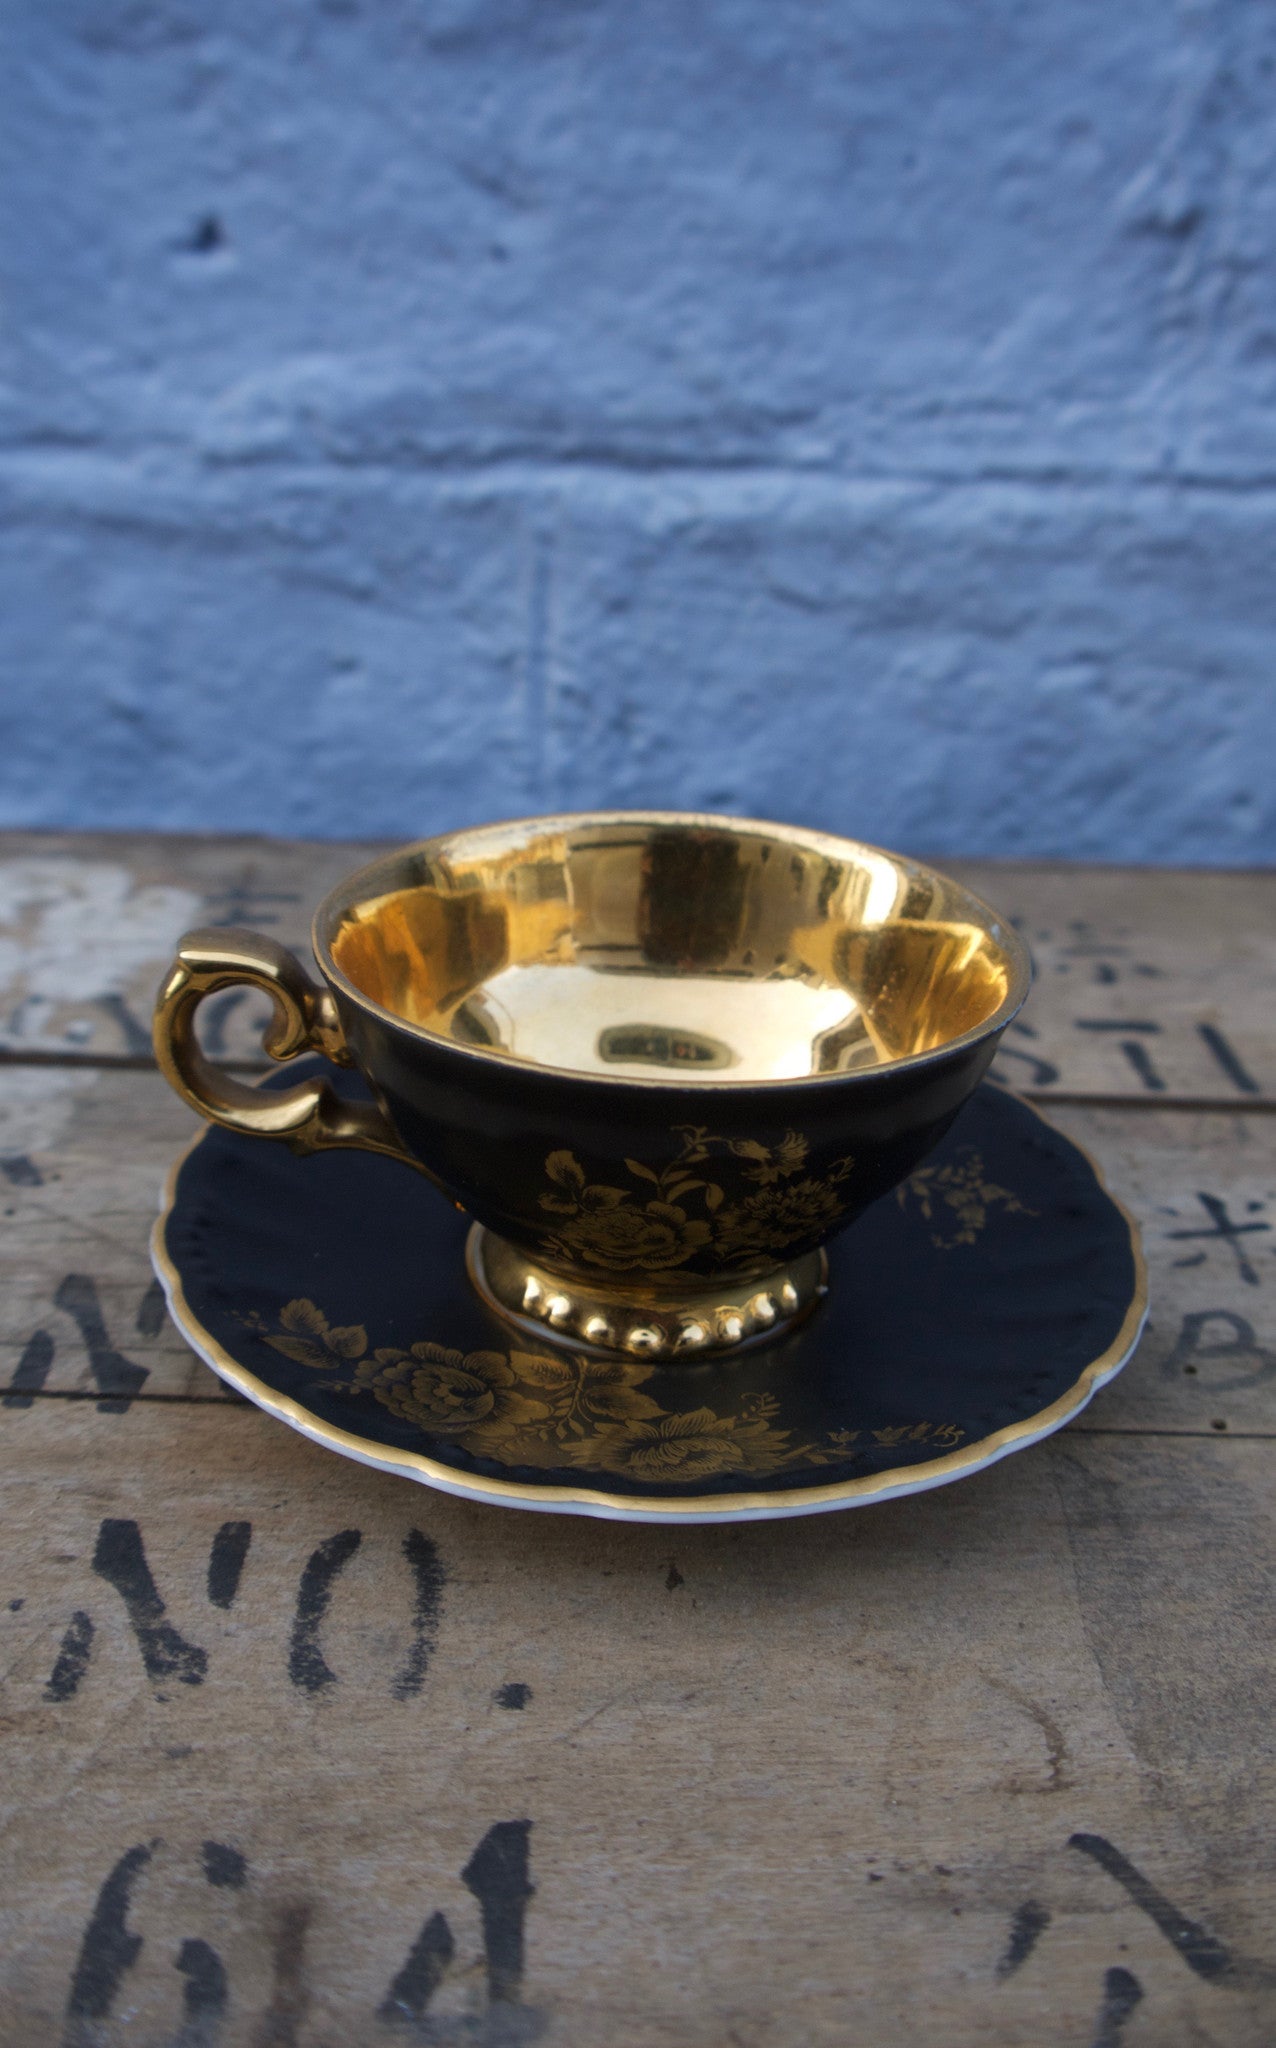 Stunning bavarian black and gold vintage teaset - six cups and saucers